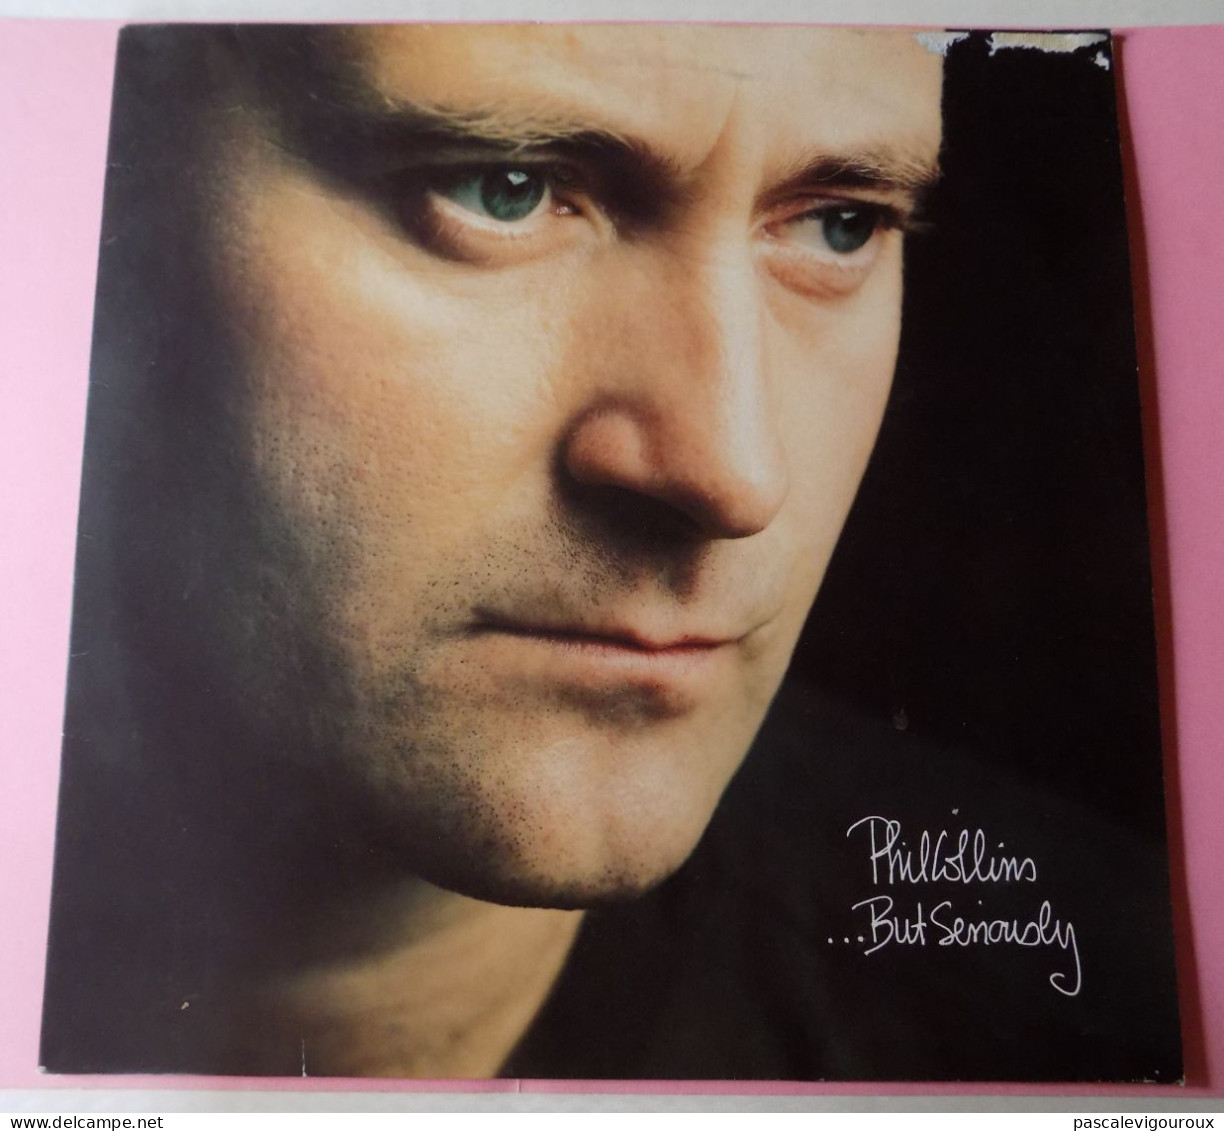 PHIL COLLINS / BUT SERIOUSLY / VINYLE STEREO LP 33T / 1989 / WEA INTERNATIONAL - Andere - Engelstalig